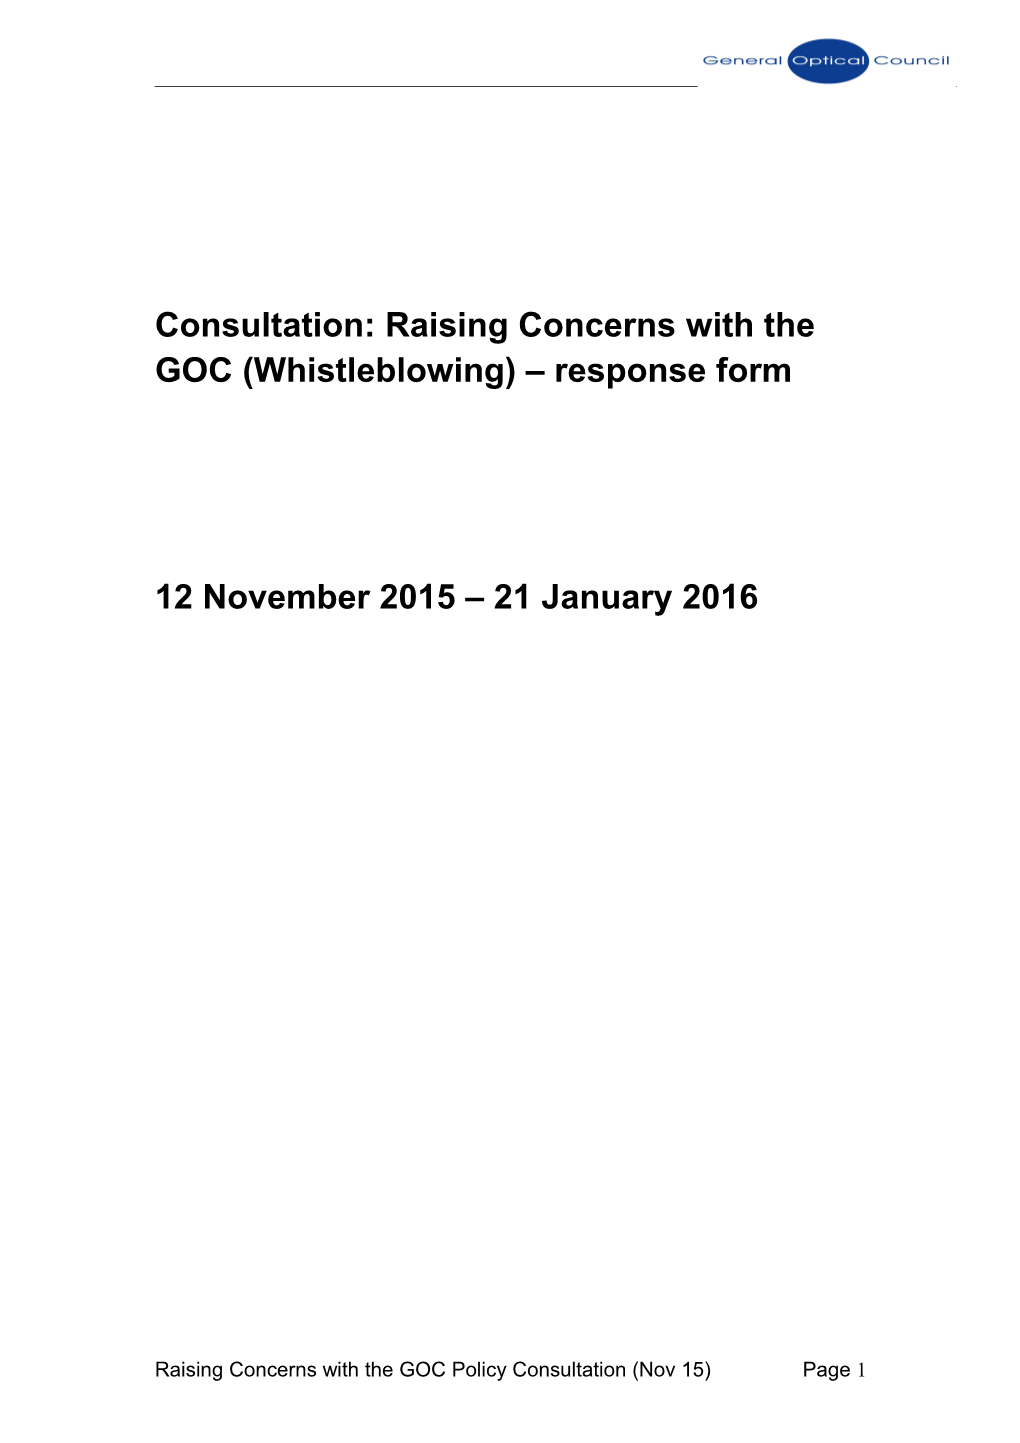 Consultation: Raising Concerns with the GOC (Whistleblowing) Response Form